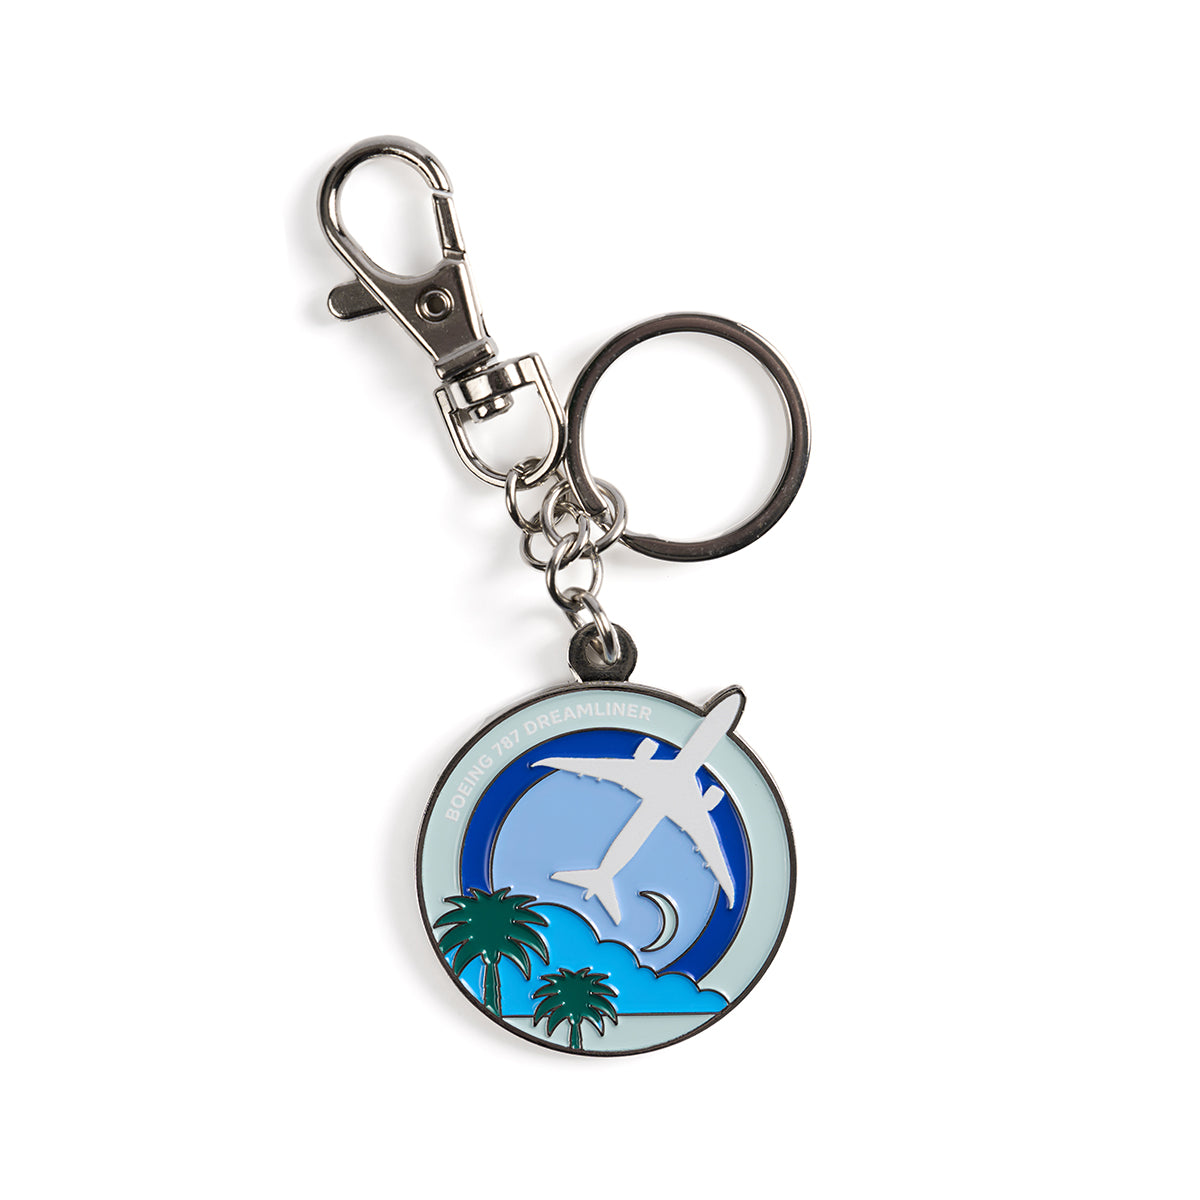 Skyward keychain, featuring the iconic Boeing 787 Dreamliner in a roundel design.